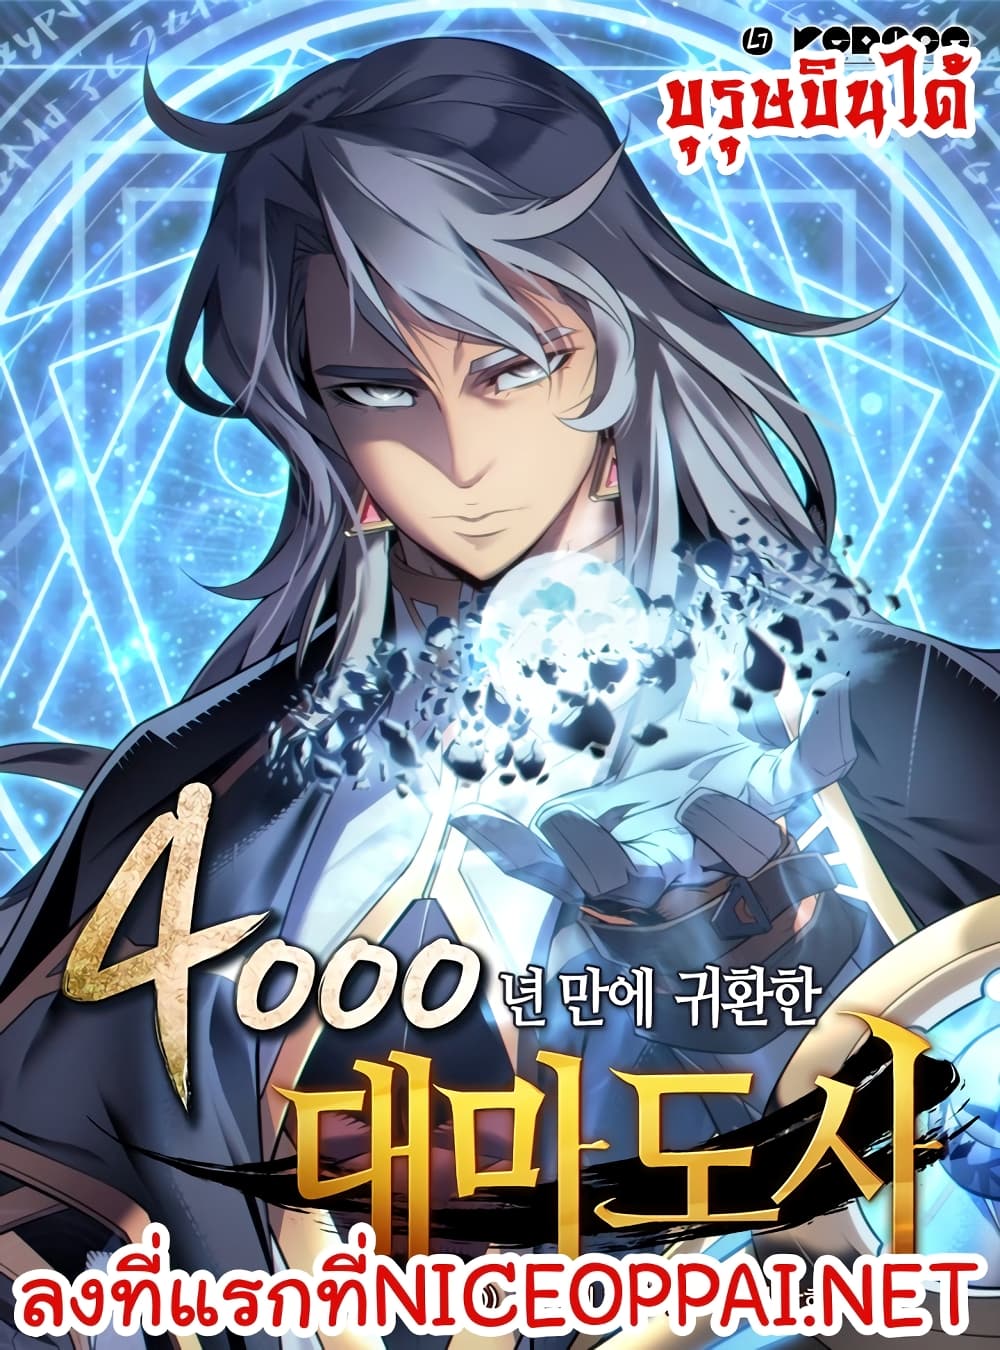 The Great Mage Returns After 4000 Years 37 (1)